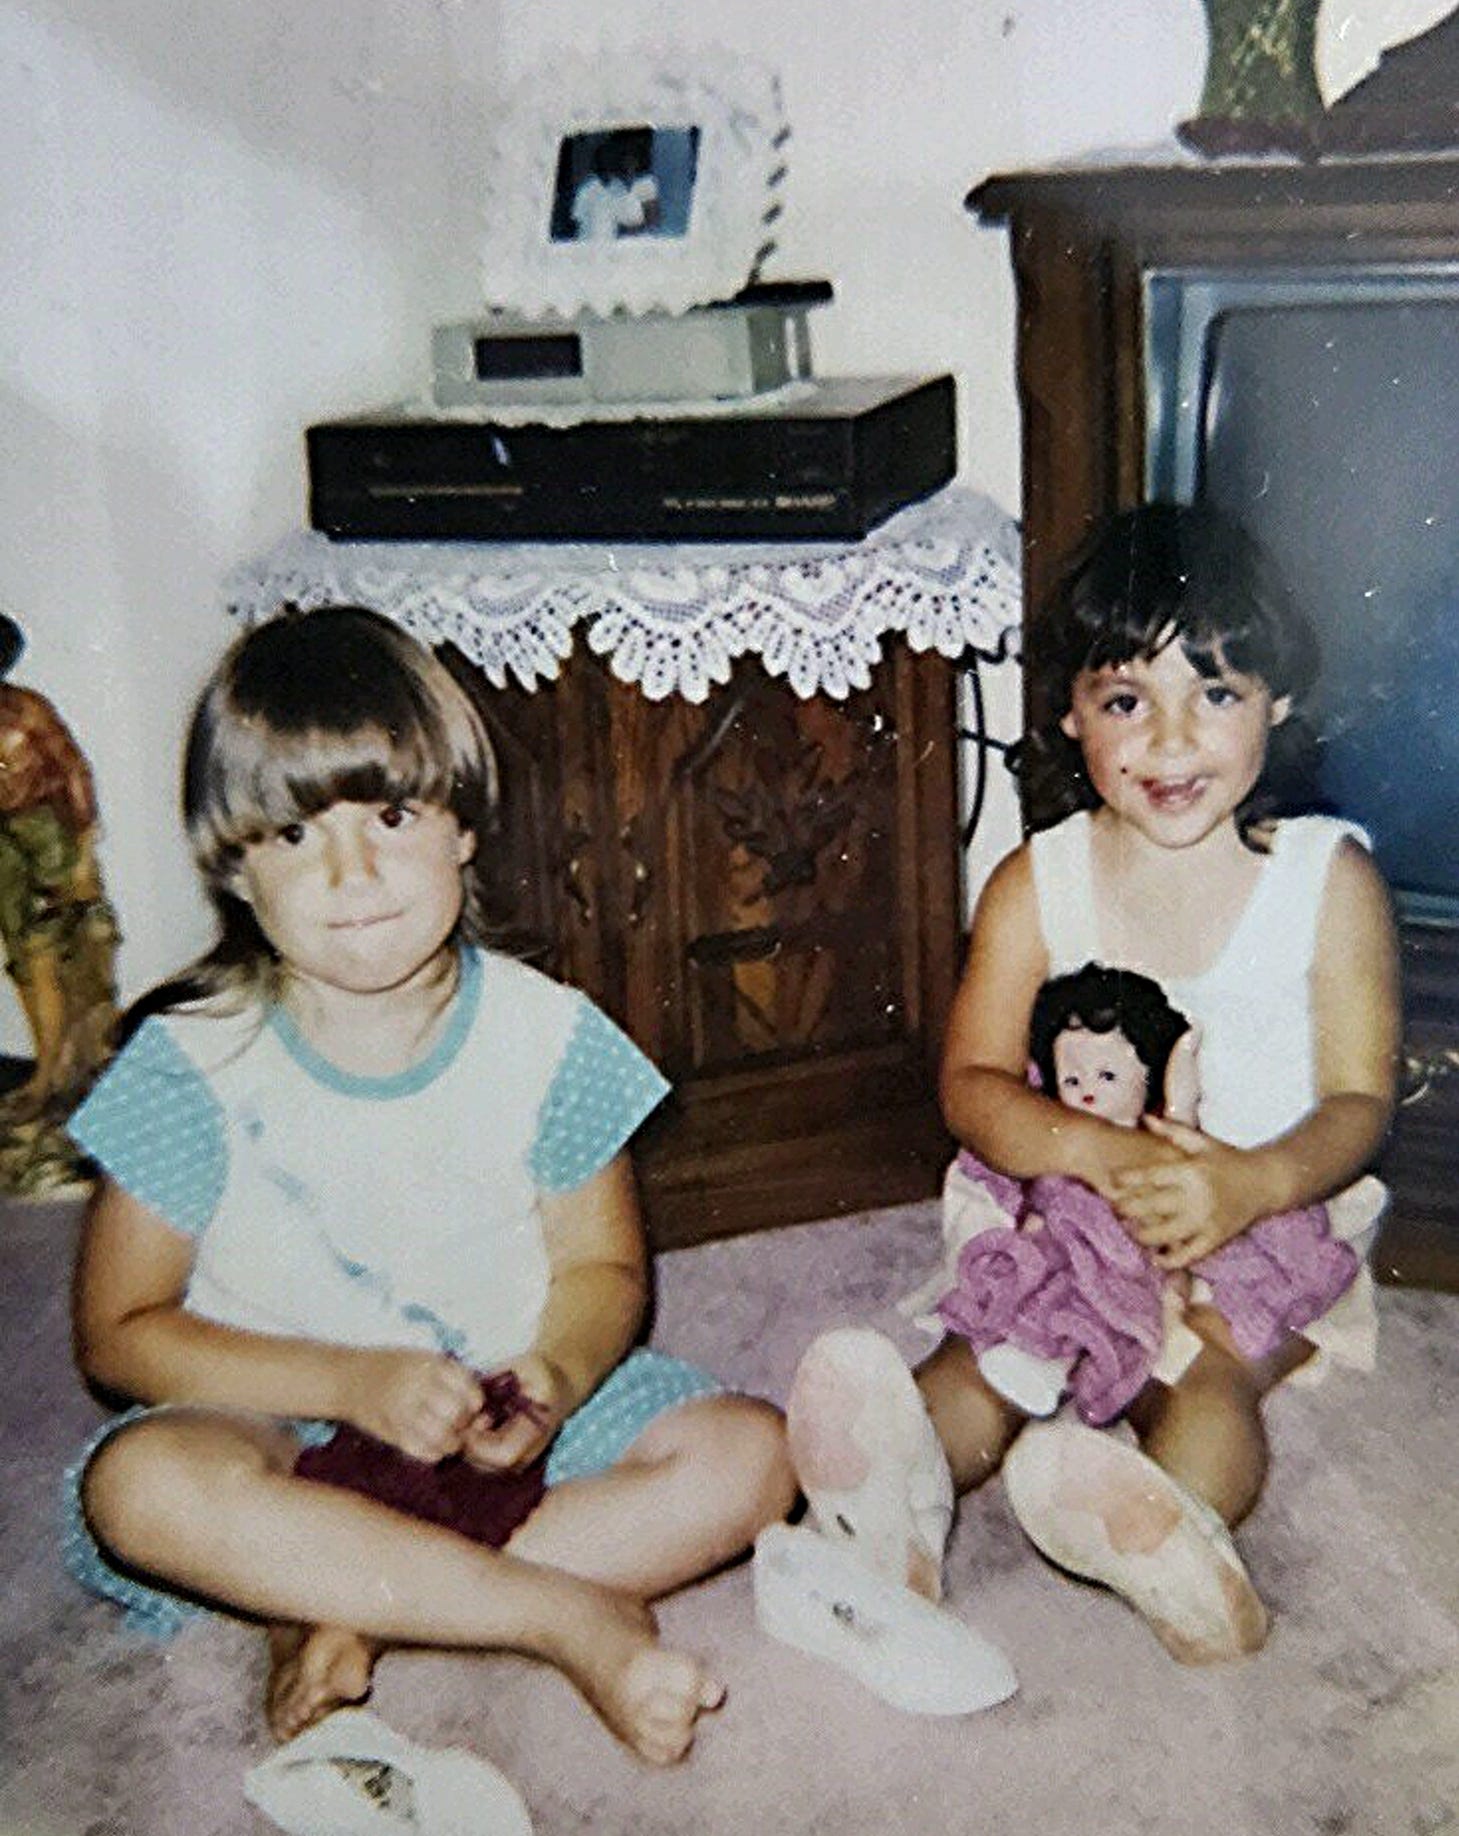 Angelica and Rosalie on their first day in a new foster home in 1993.